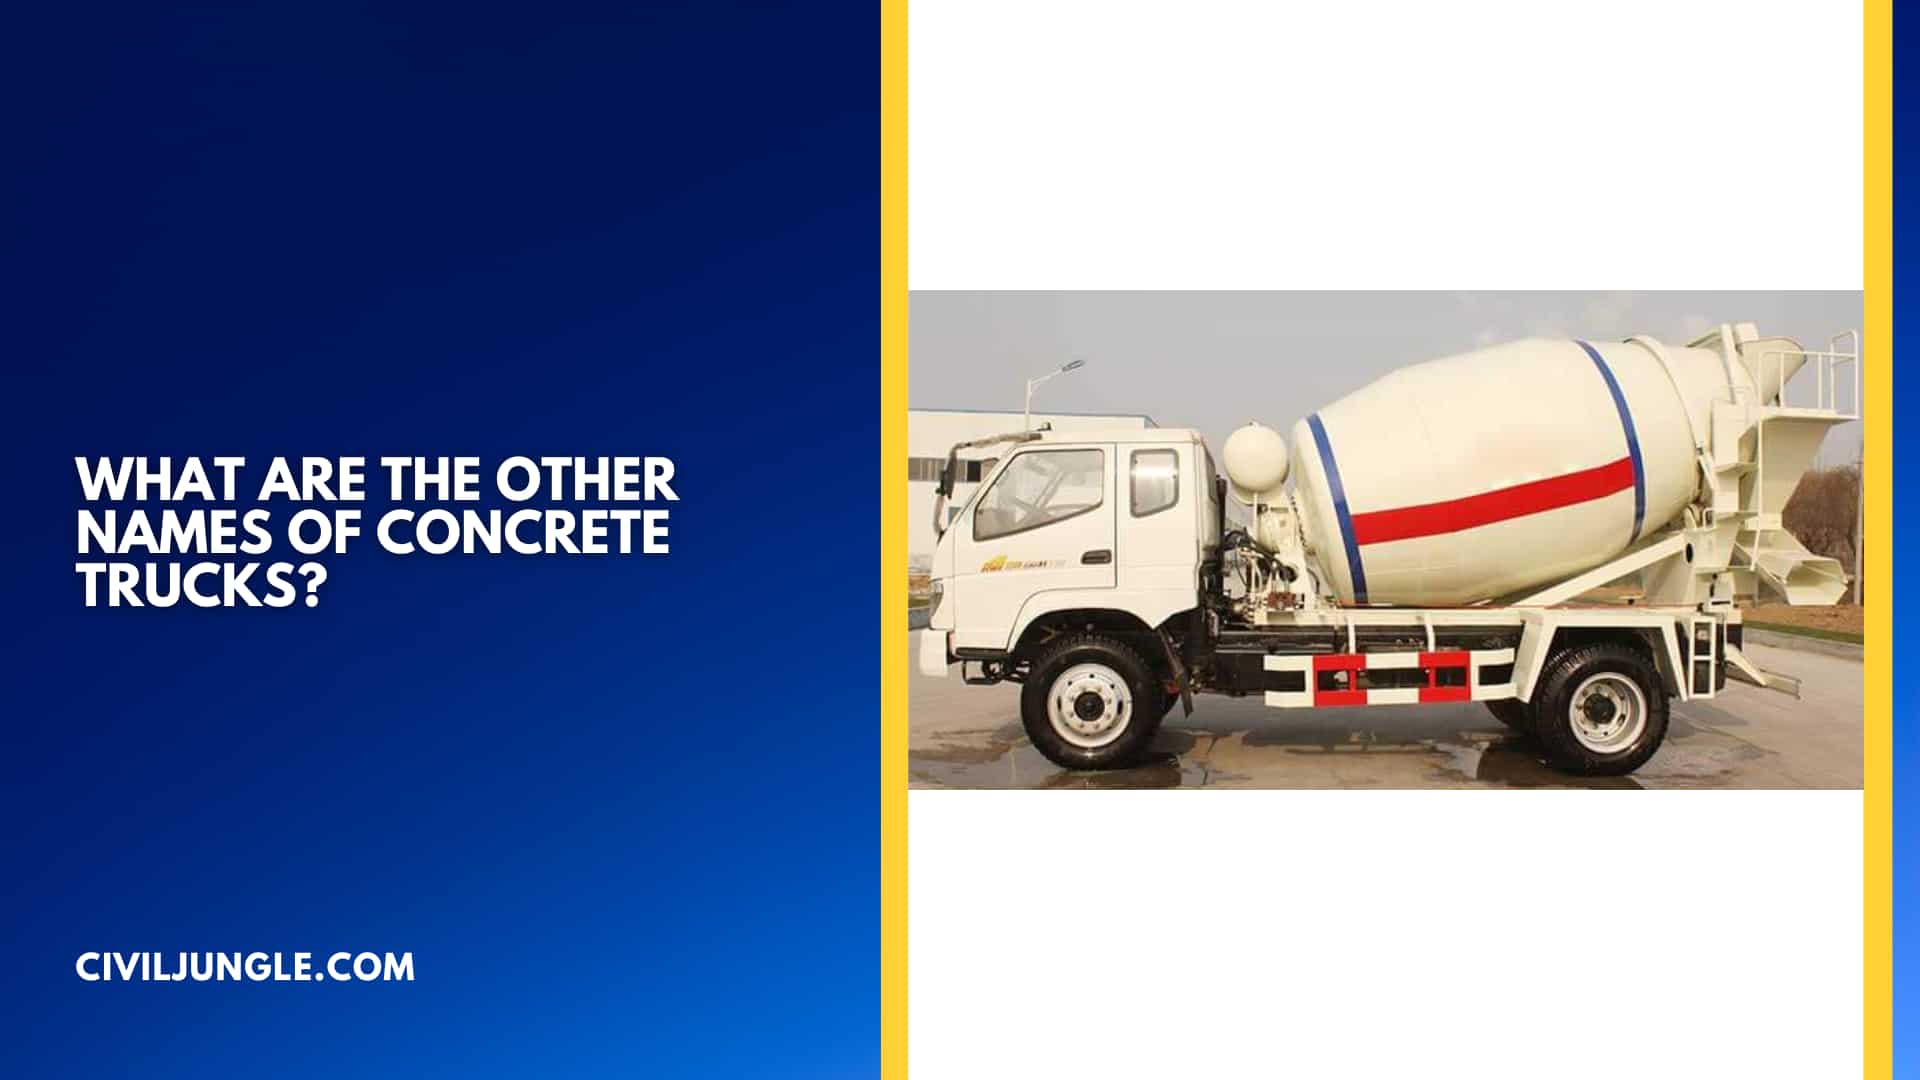 What are the Other Names of Concrete Trucks?